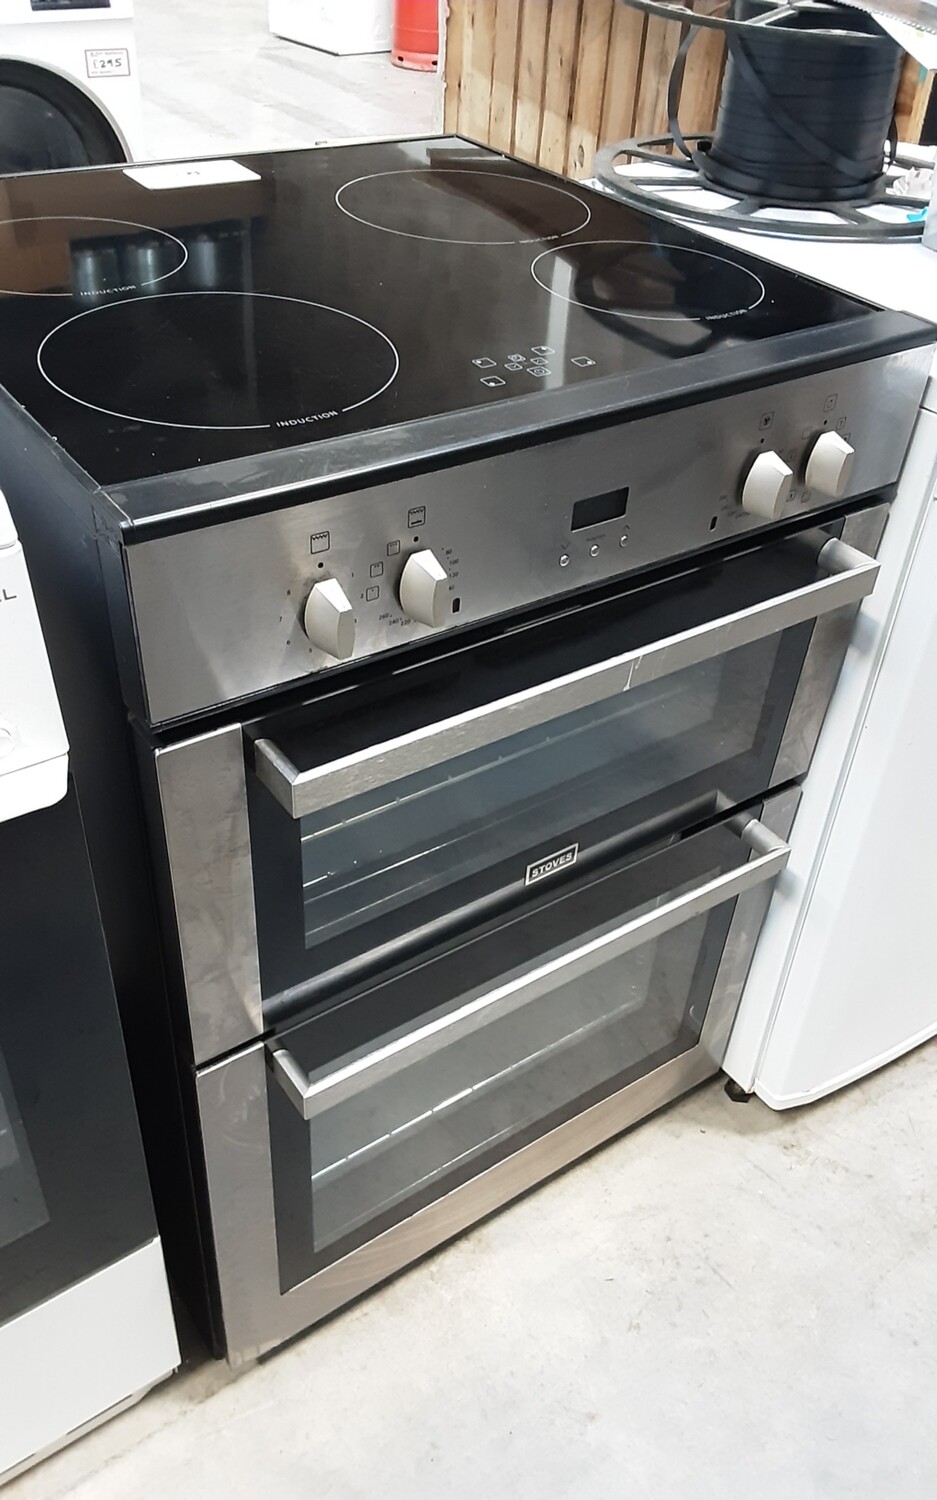 Stoves SE60MFPTi 60cm Electric cooker Twin Cavity Induction Hob - Silver Stainless  - Refurbished + 6 month guarantee 